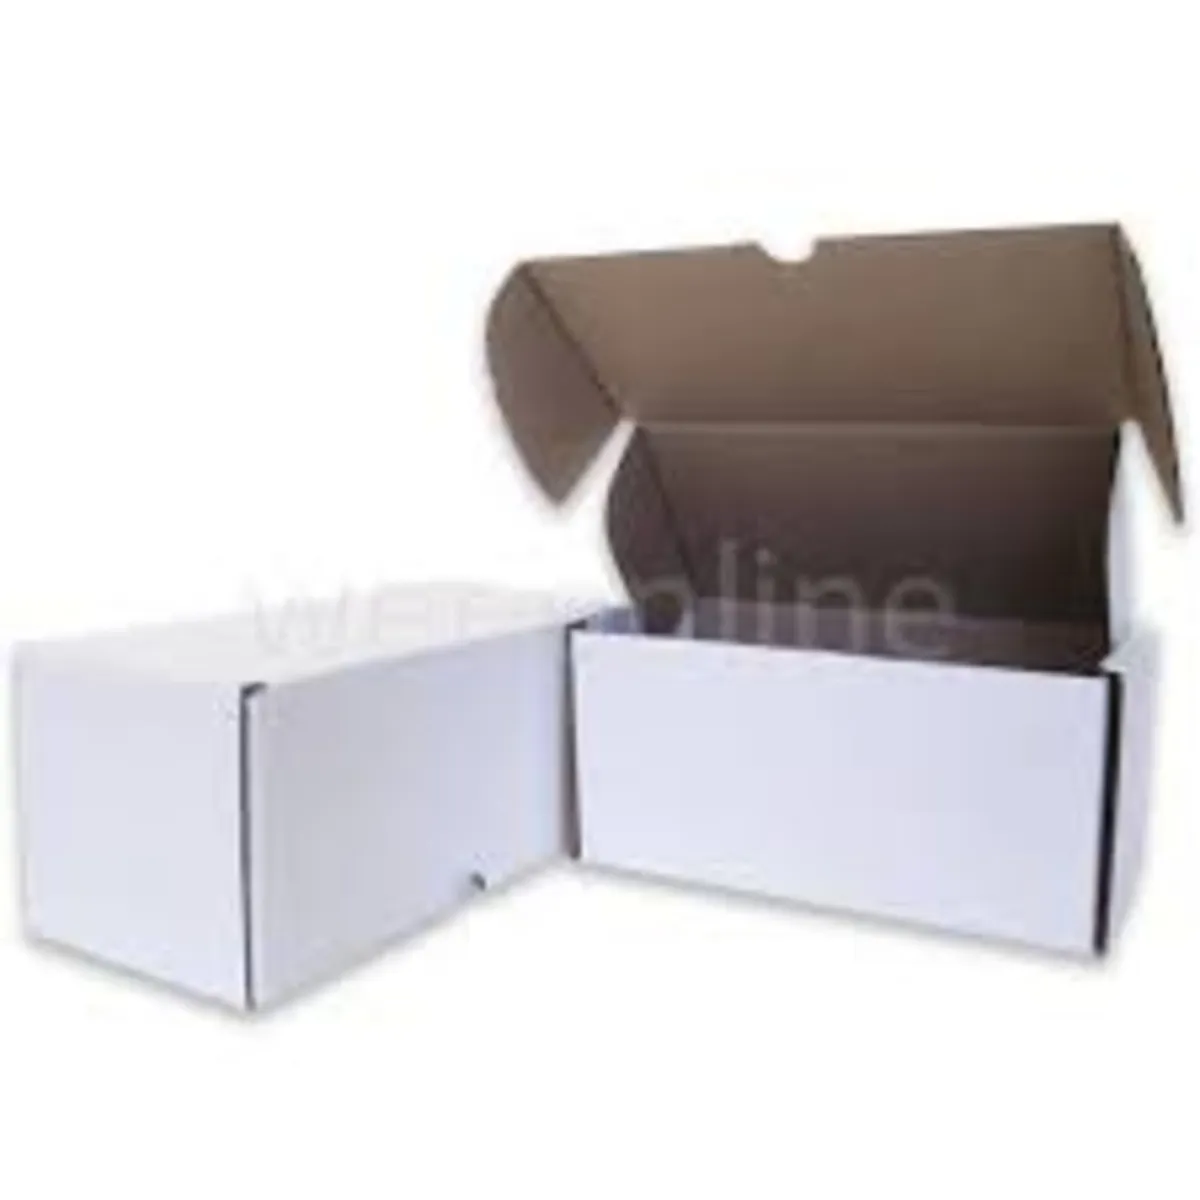 Postal Boxes - 12 Sizes - Packs of 20 and 50 - Image 1